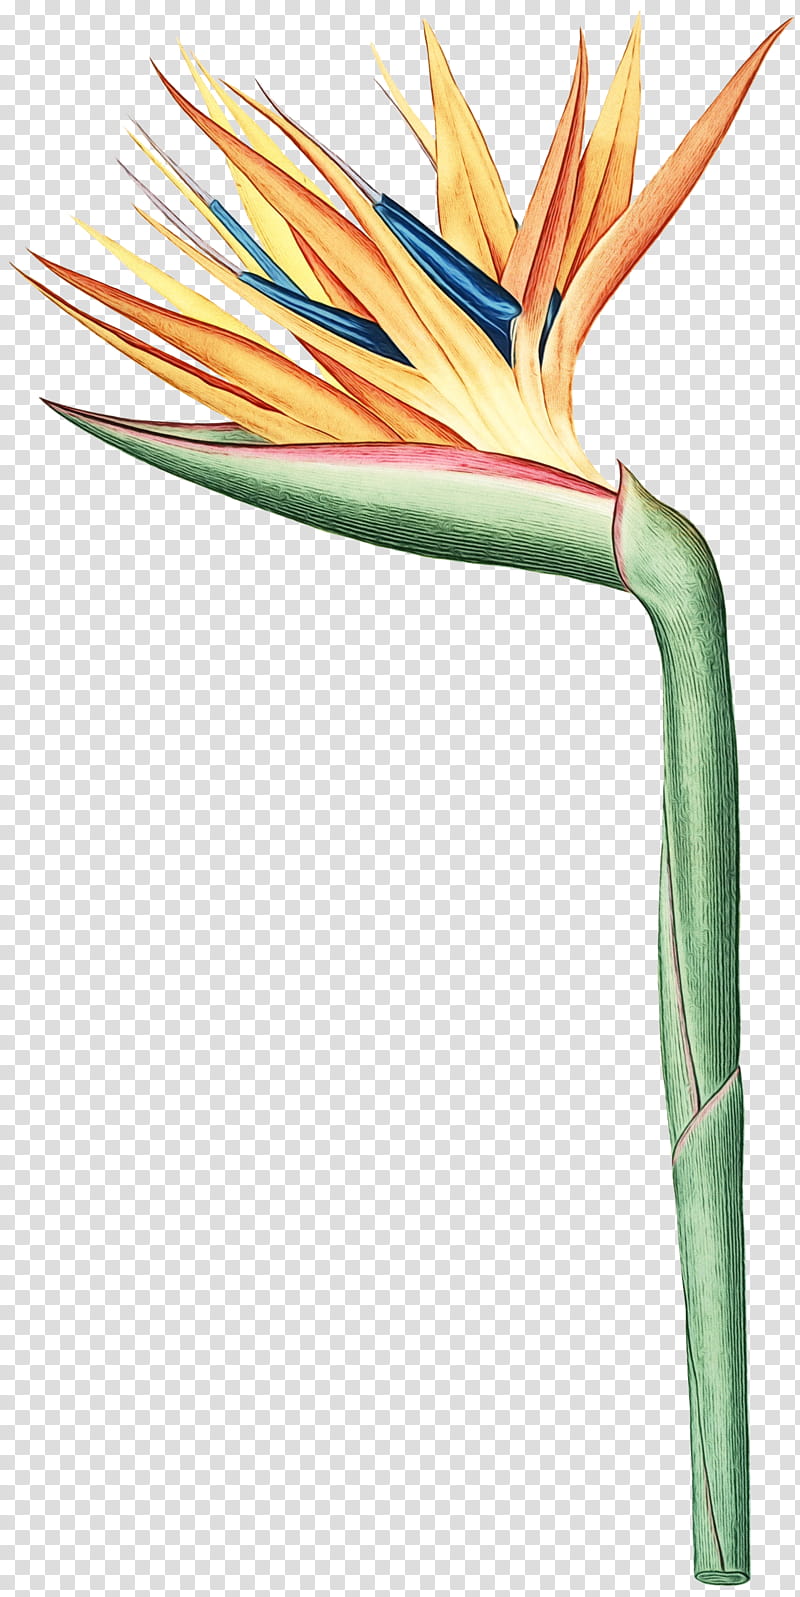 Bird Of Paradise, Watercolor Painting, Drawing, Bird Of Paradise Flower, Cable, Networking Cables, Plant, Electrical Wiring transparent background PNG clipart